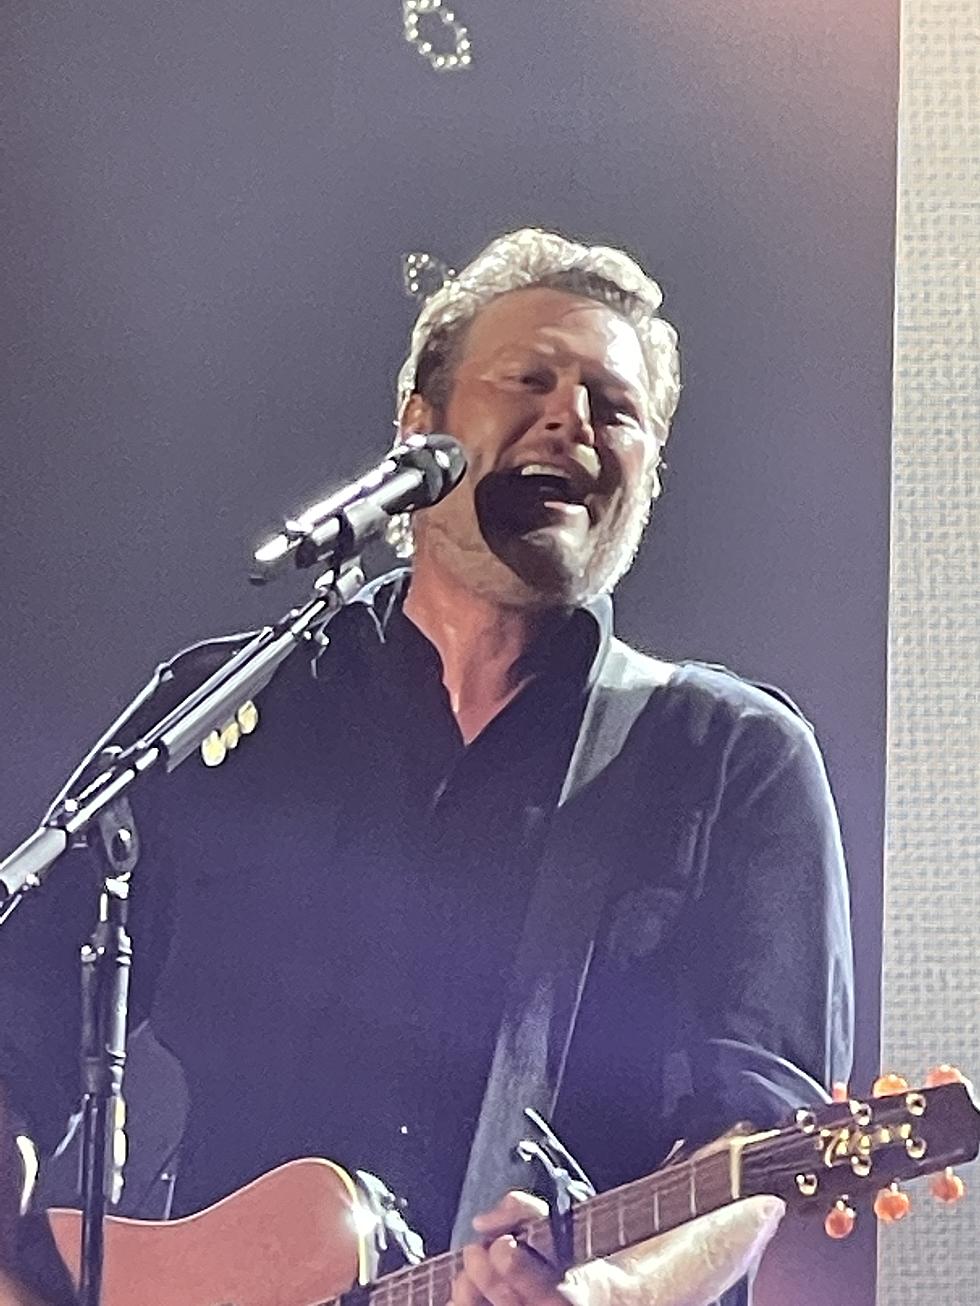 Blake Shelton Visits Michigan, Loves Our Home State And Charms Fans